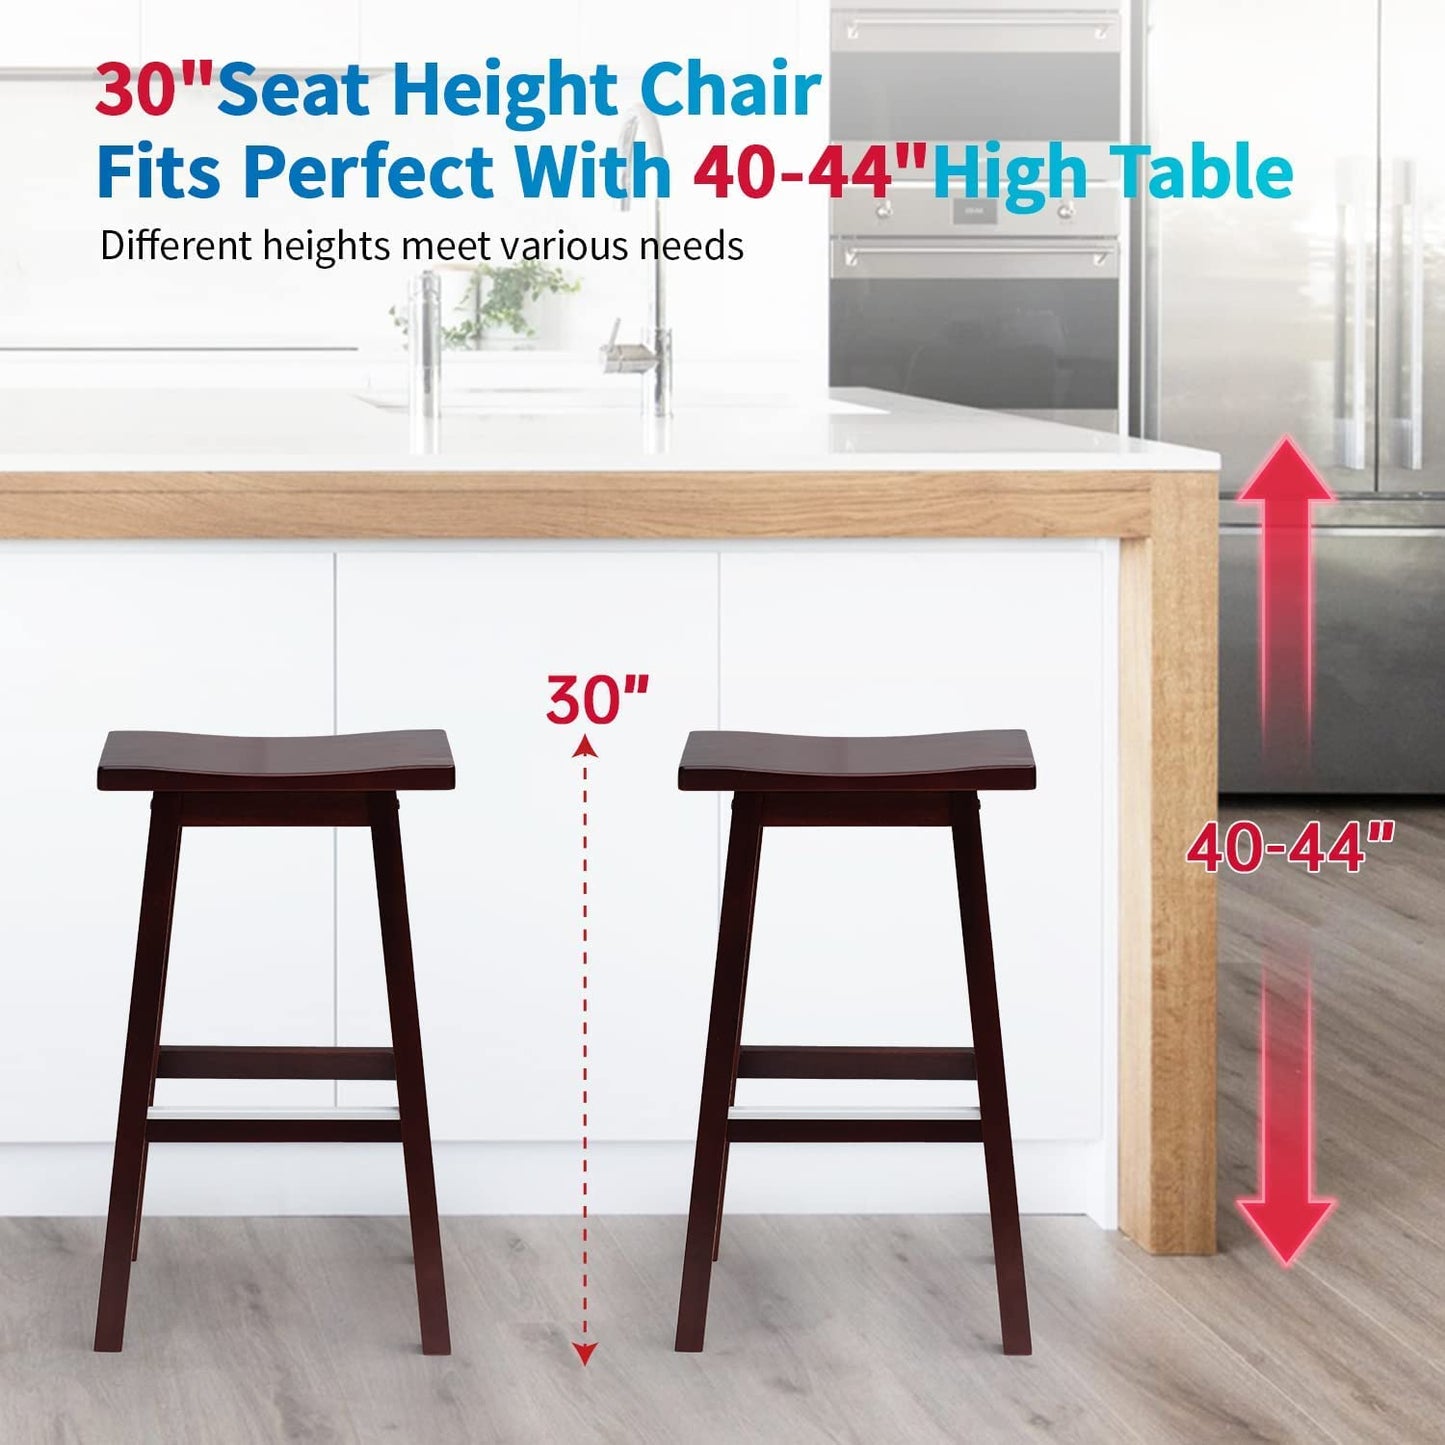 Capacmkseh Solid Wood Saddle-Seat Kitchen Counter Barstools Set of 2, 30-Inch Height, Counter Height Bar Stools Wooden Stool Saddle Chair Tall Stool